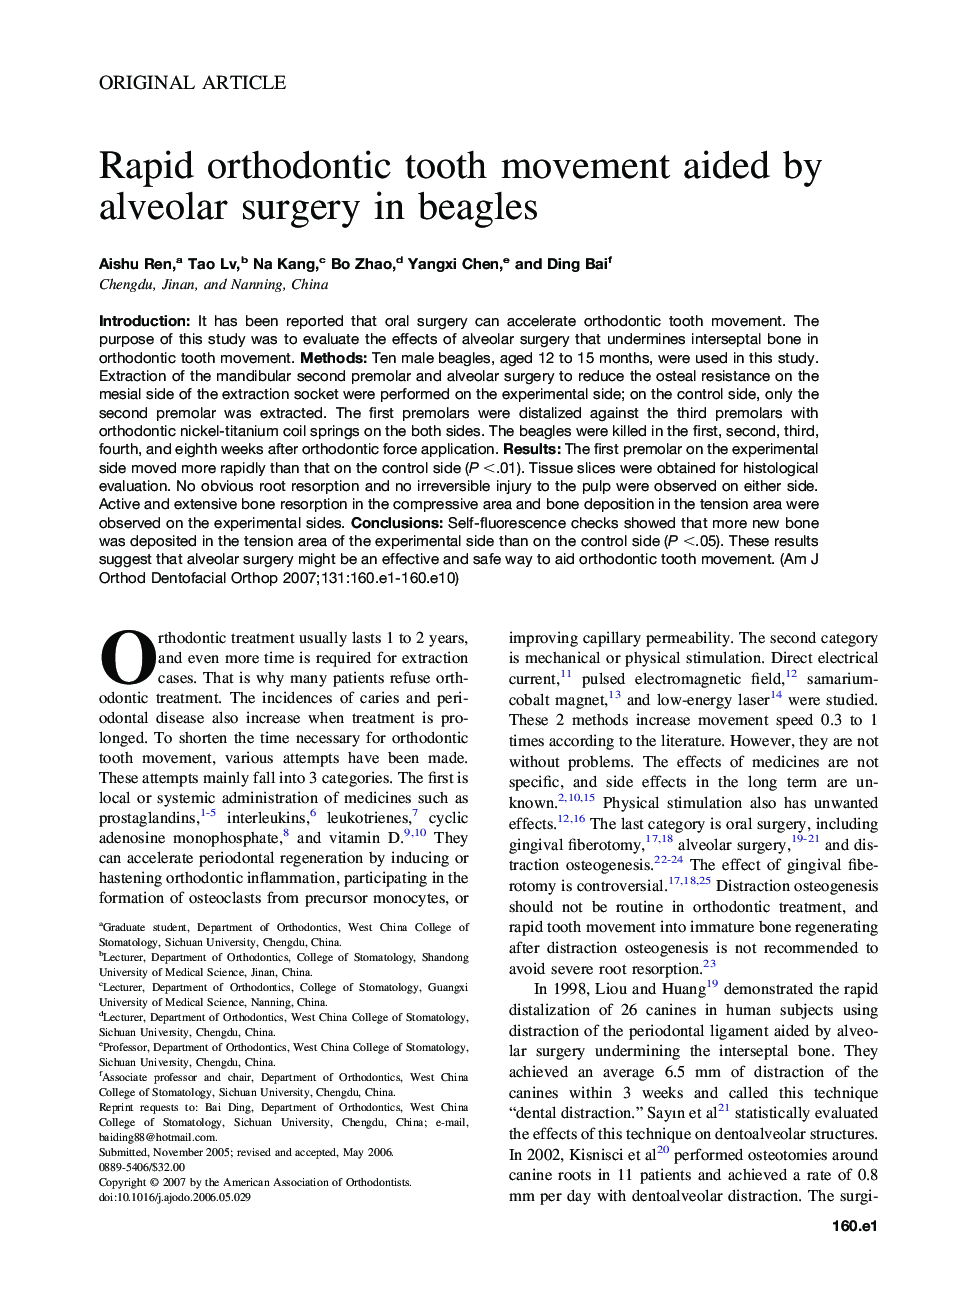 Rapid orthodontic tooth movement aided by alveolar surgery in beagles